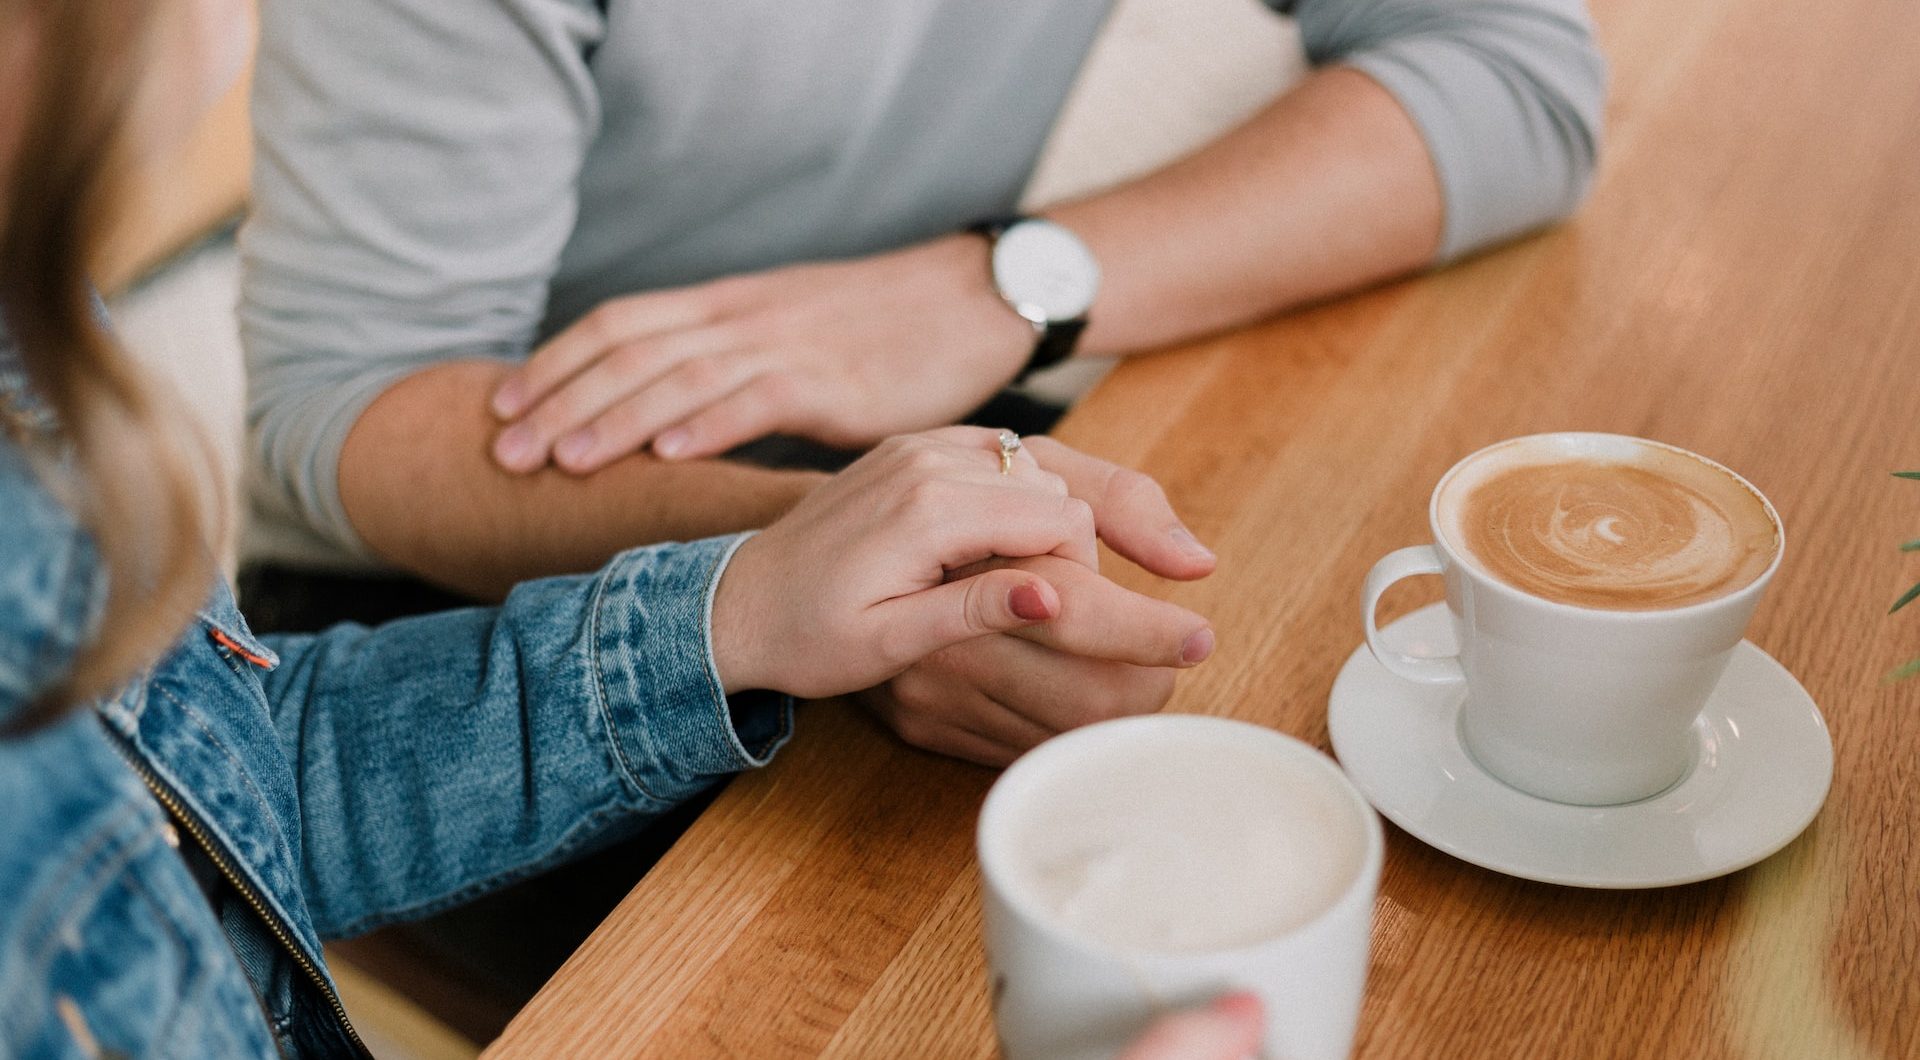 A couple reassuring each other while holding hands and drinking coffee.